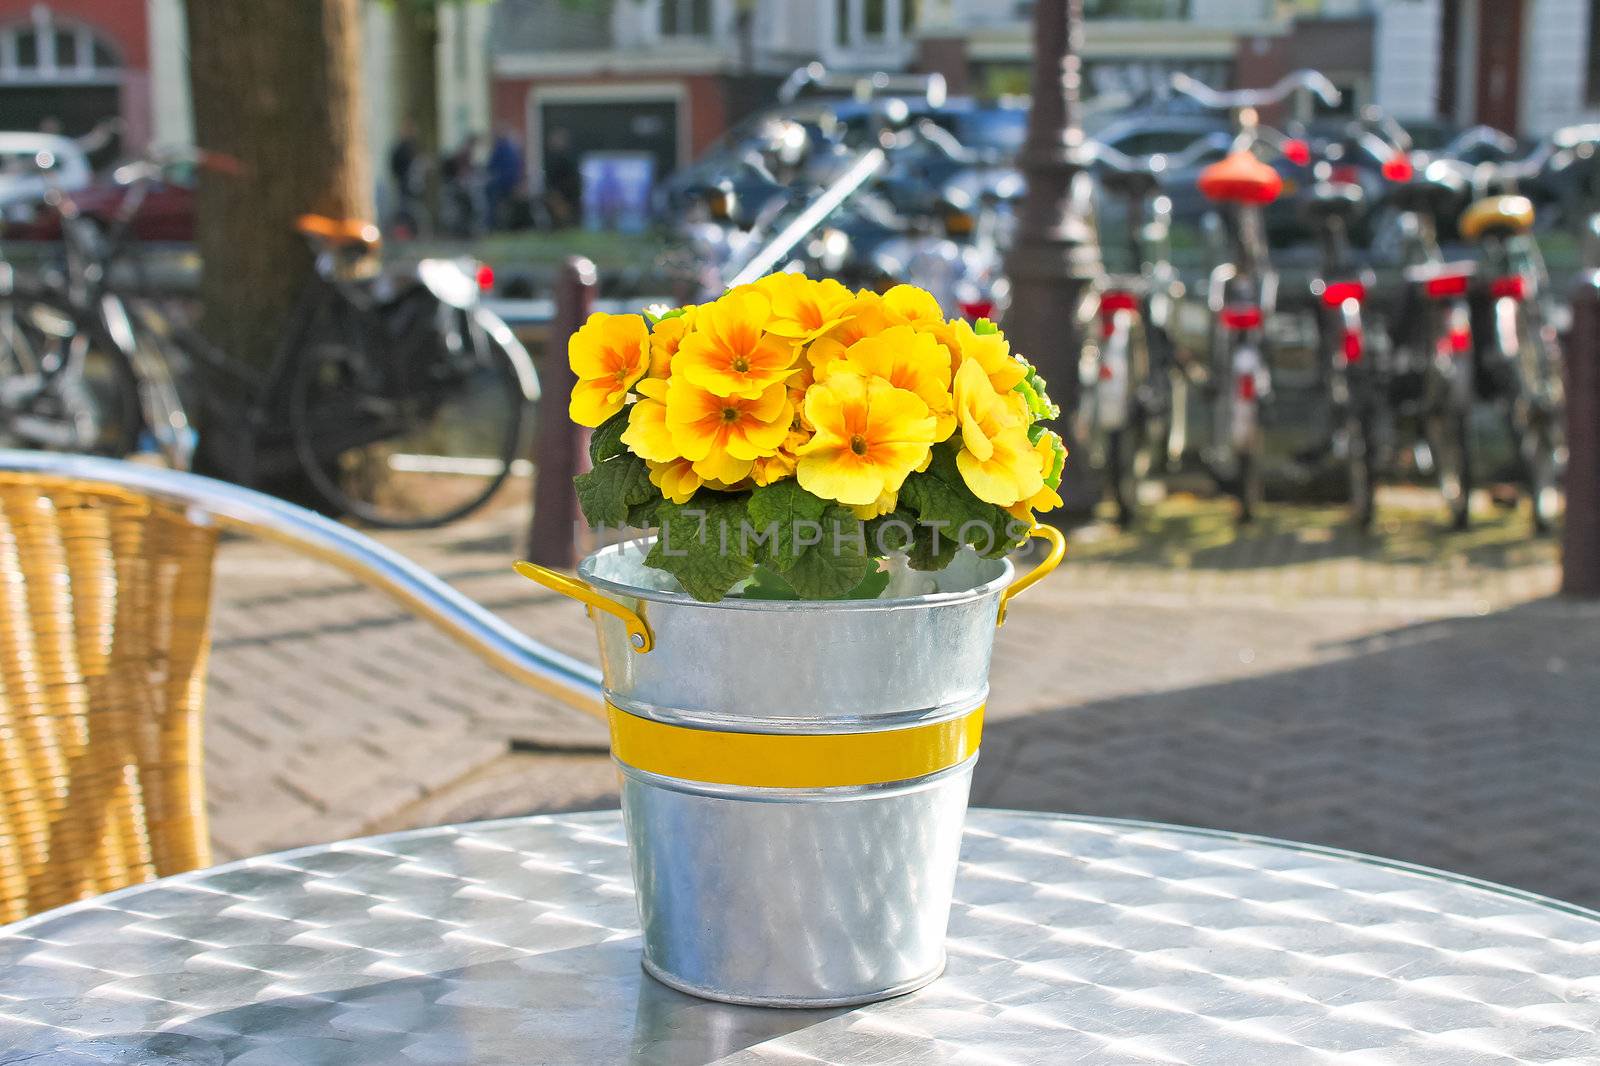 Flowers on a table in street cafe in Amsterdam. Netherlands by NickNick